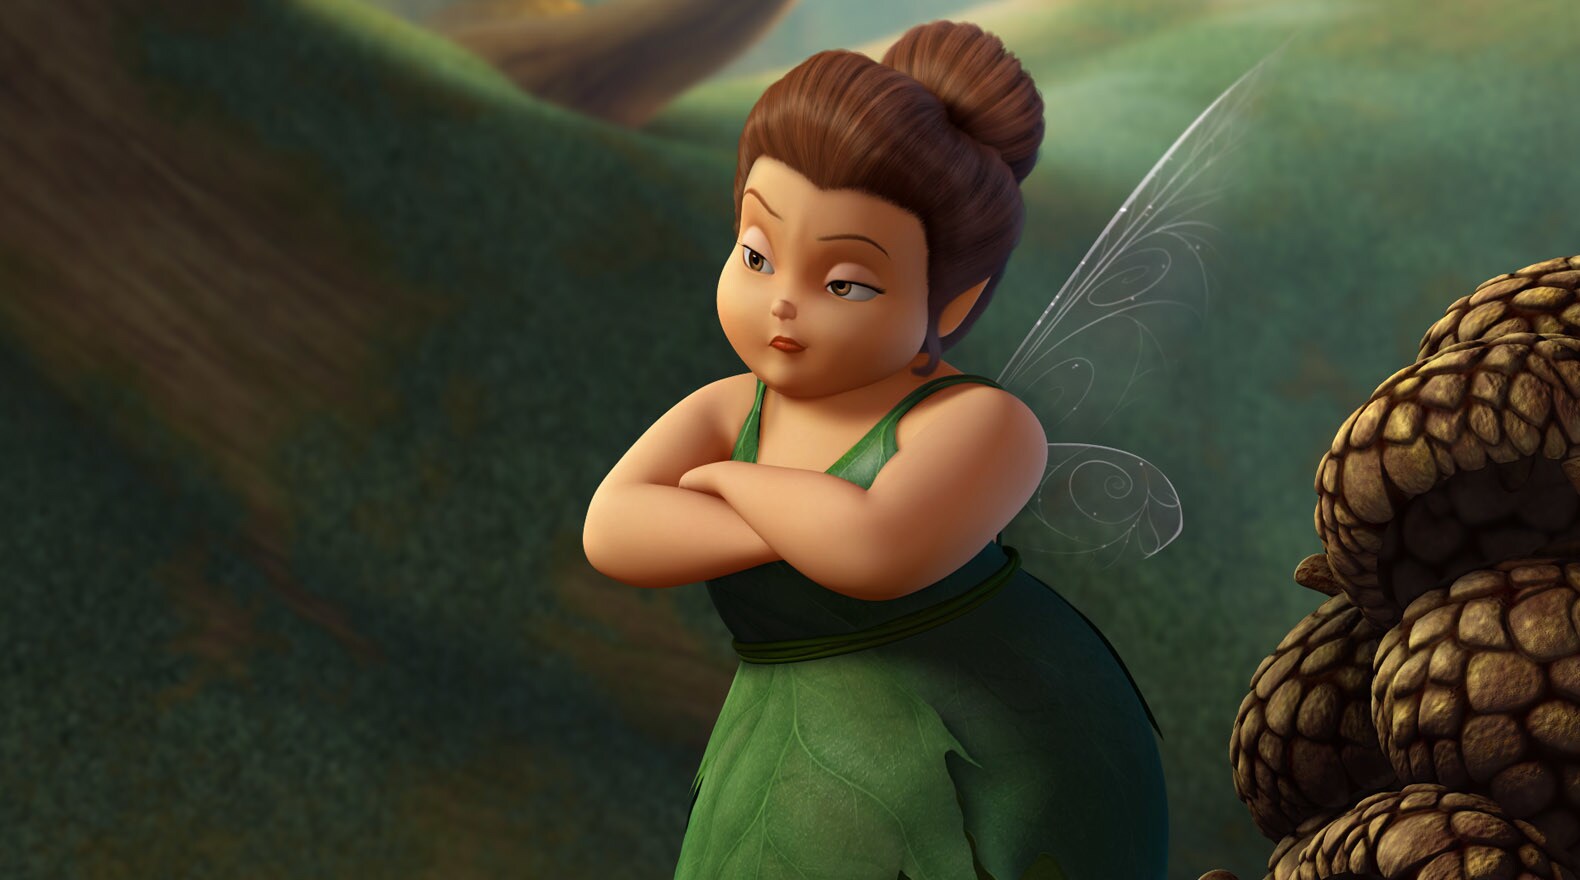 This Tinker Fairy is observant of everything that happens in Tinker’s Nook.